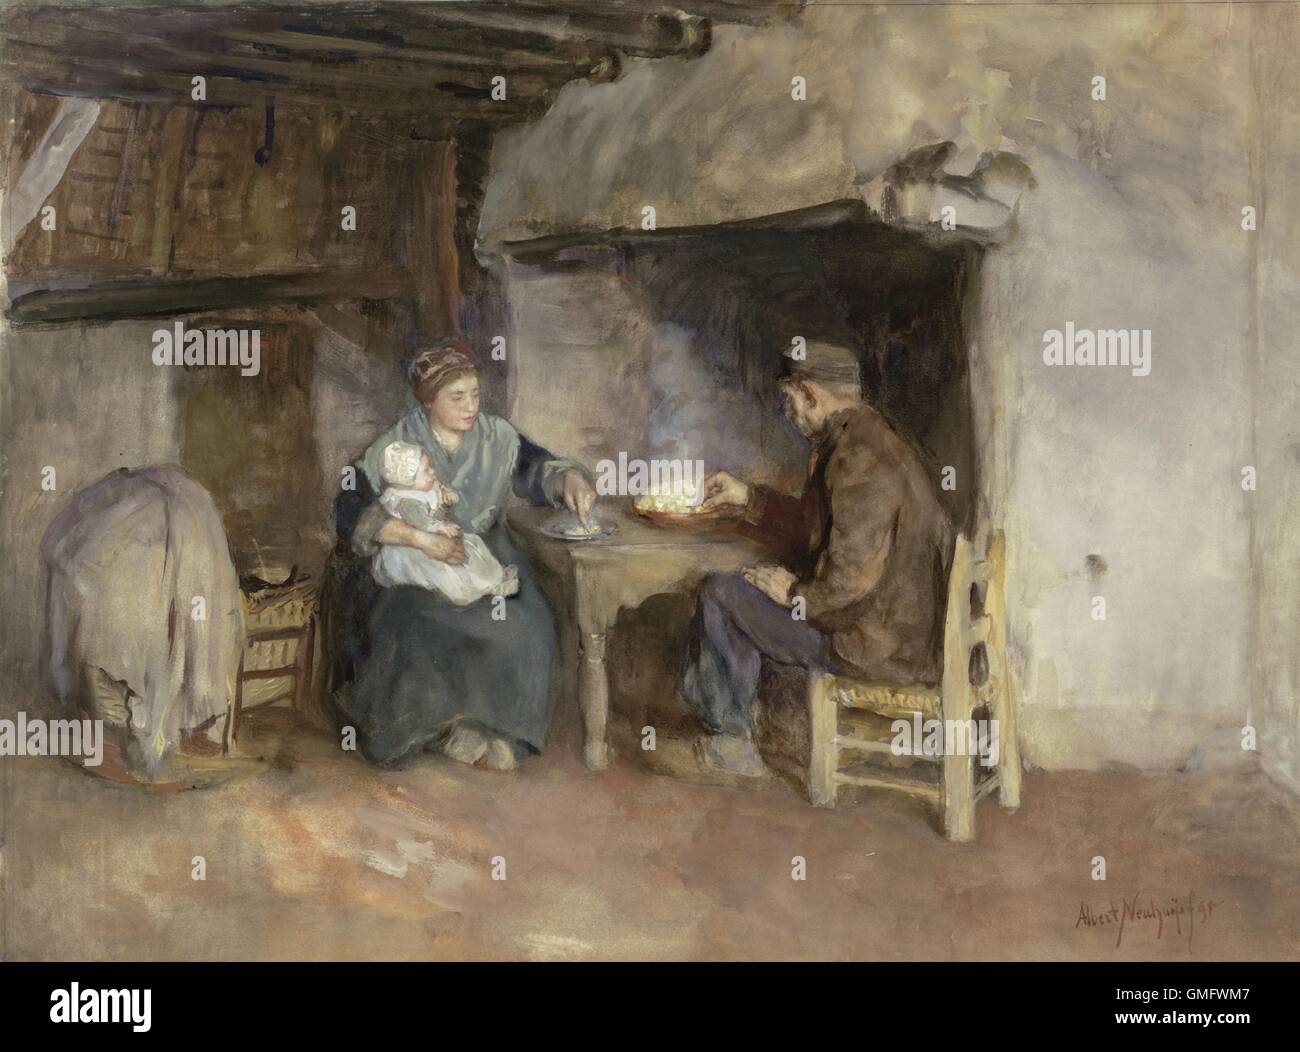 Lunch in a Farmer's Family, by Albert Neuhuys, 1895. Dutch watercolor painting. Wife, baby and father at midday meal of steaming potatoes. (BSLOC 2016 1 44) Stock Photo